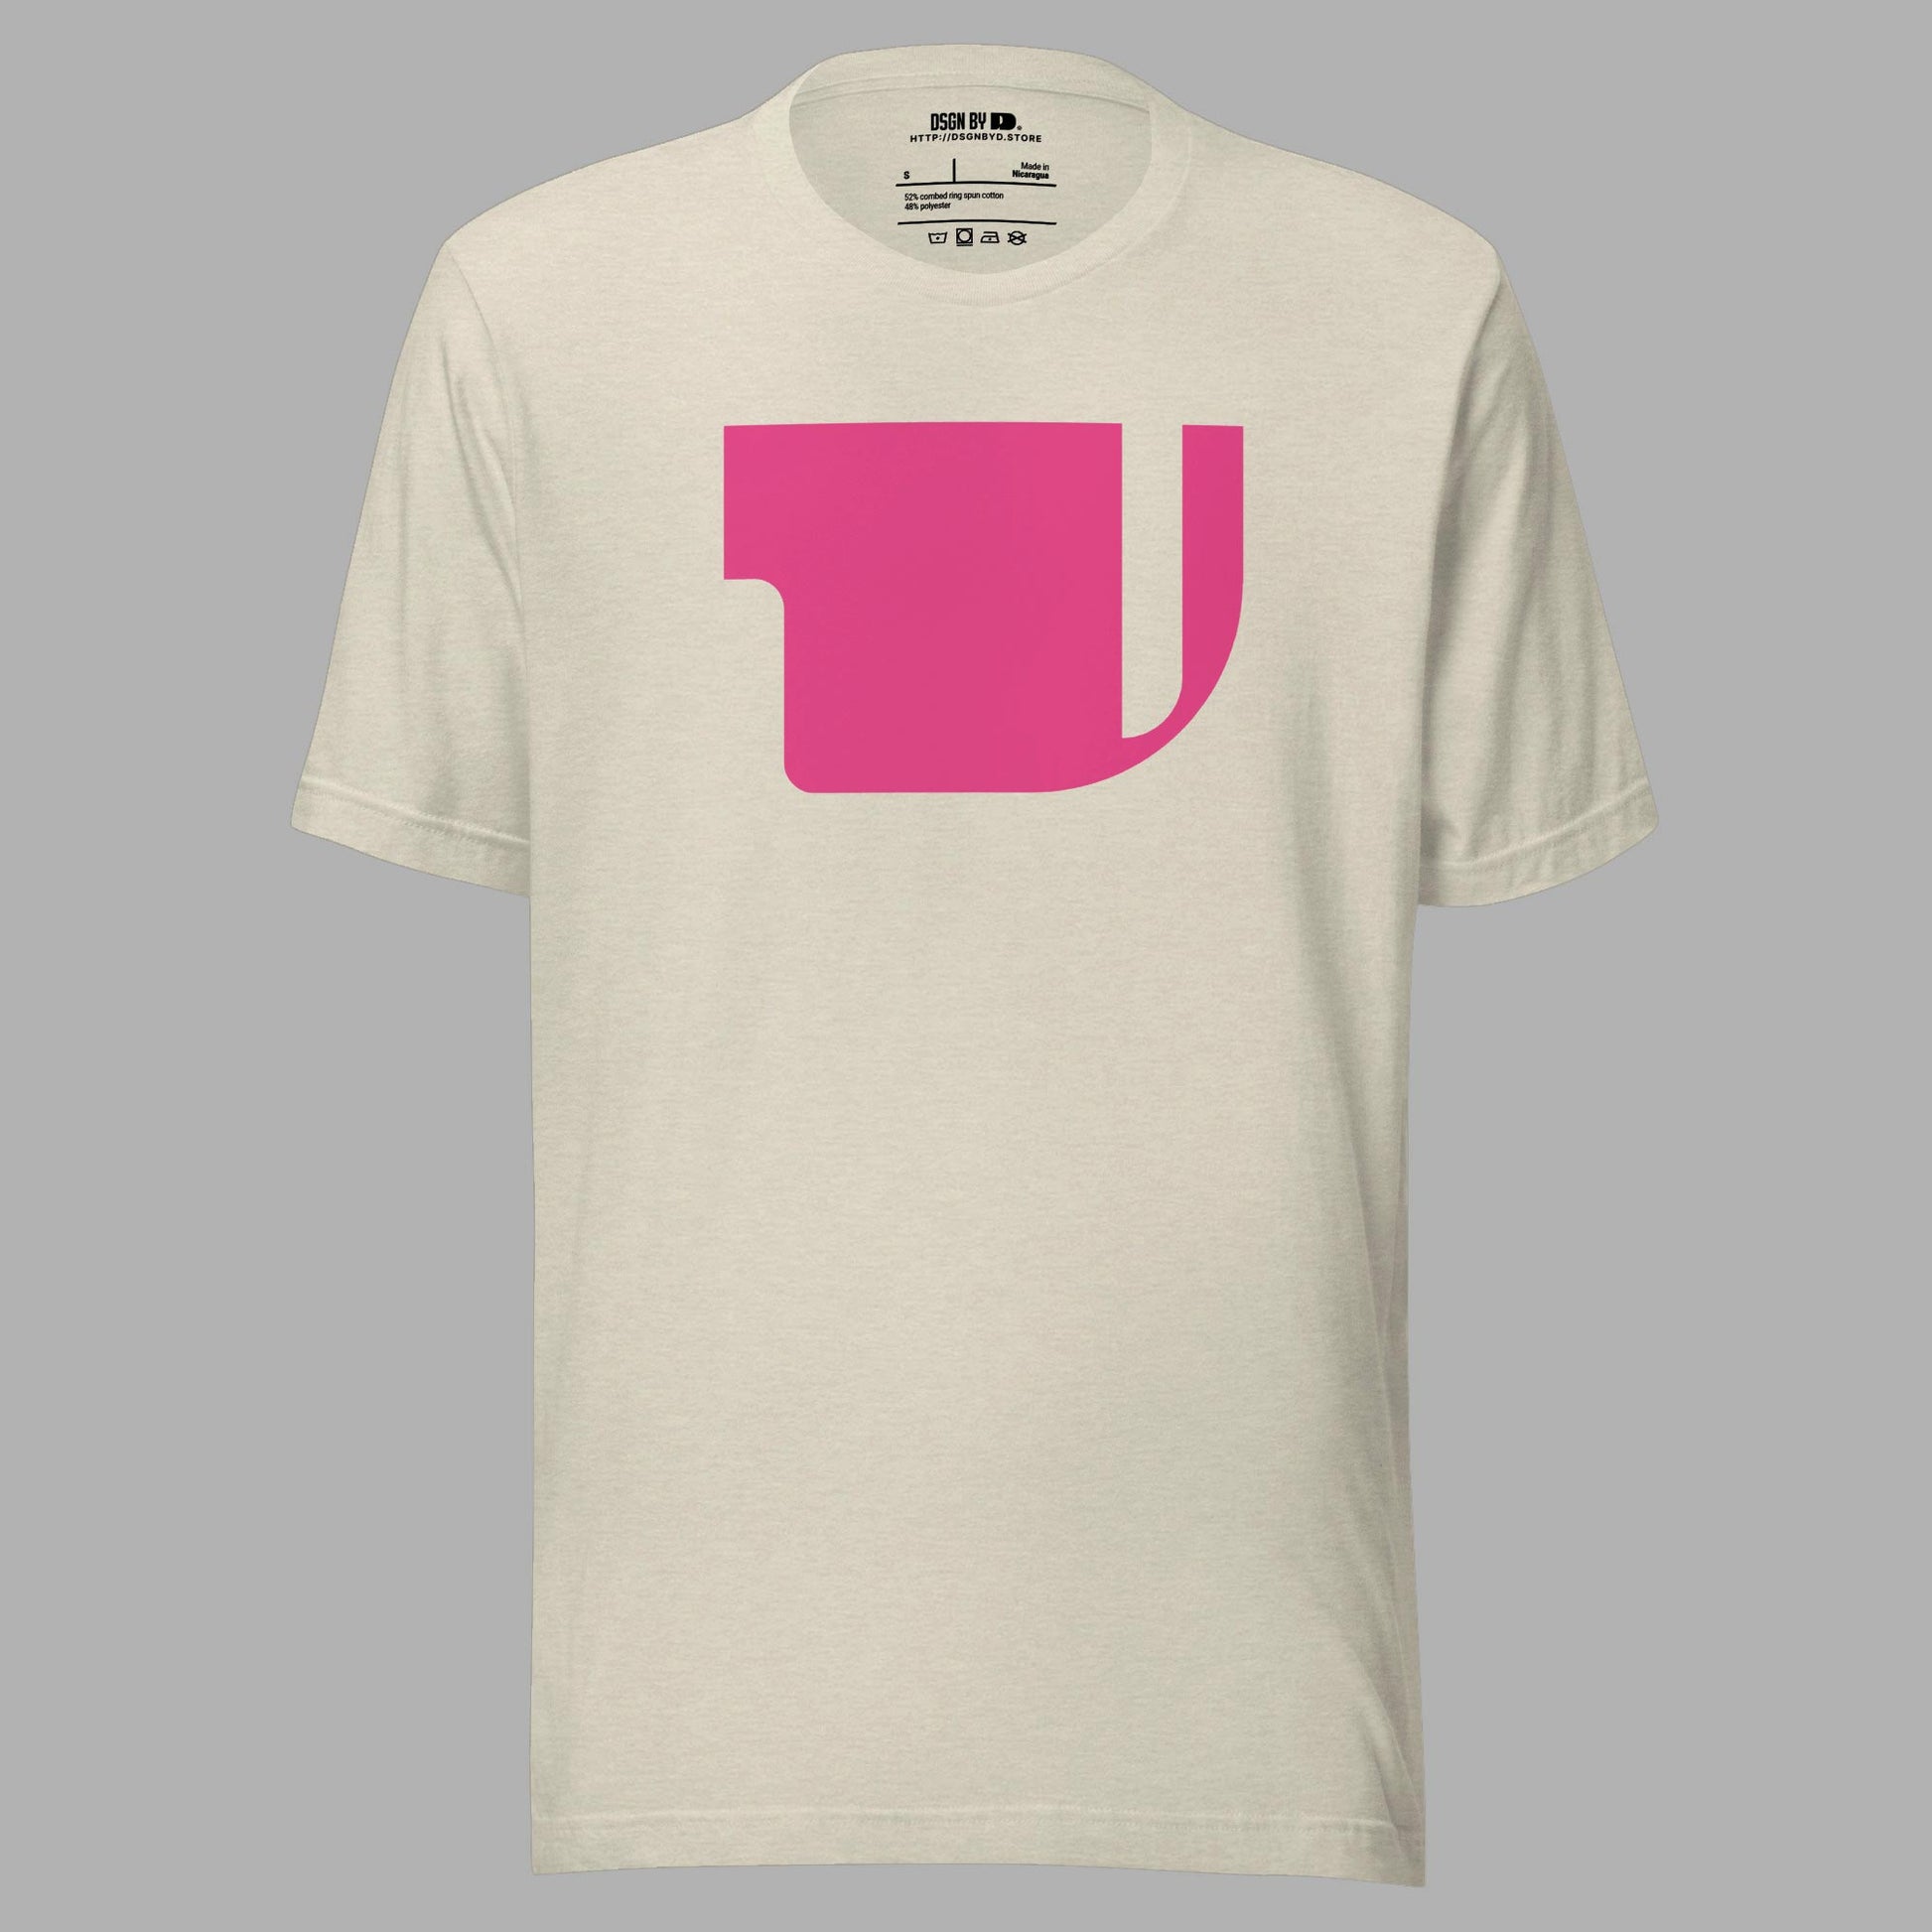 A beige cotton unisex graphic tee with letter V.